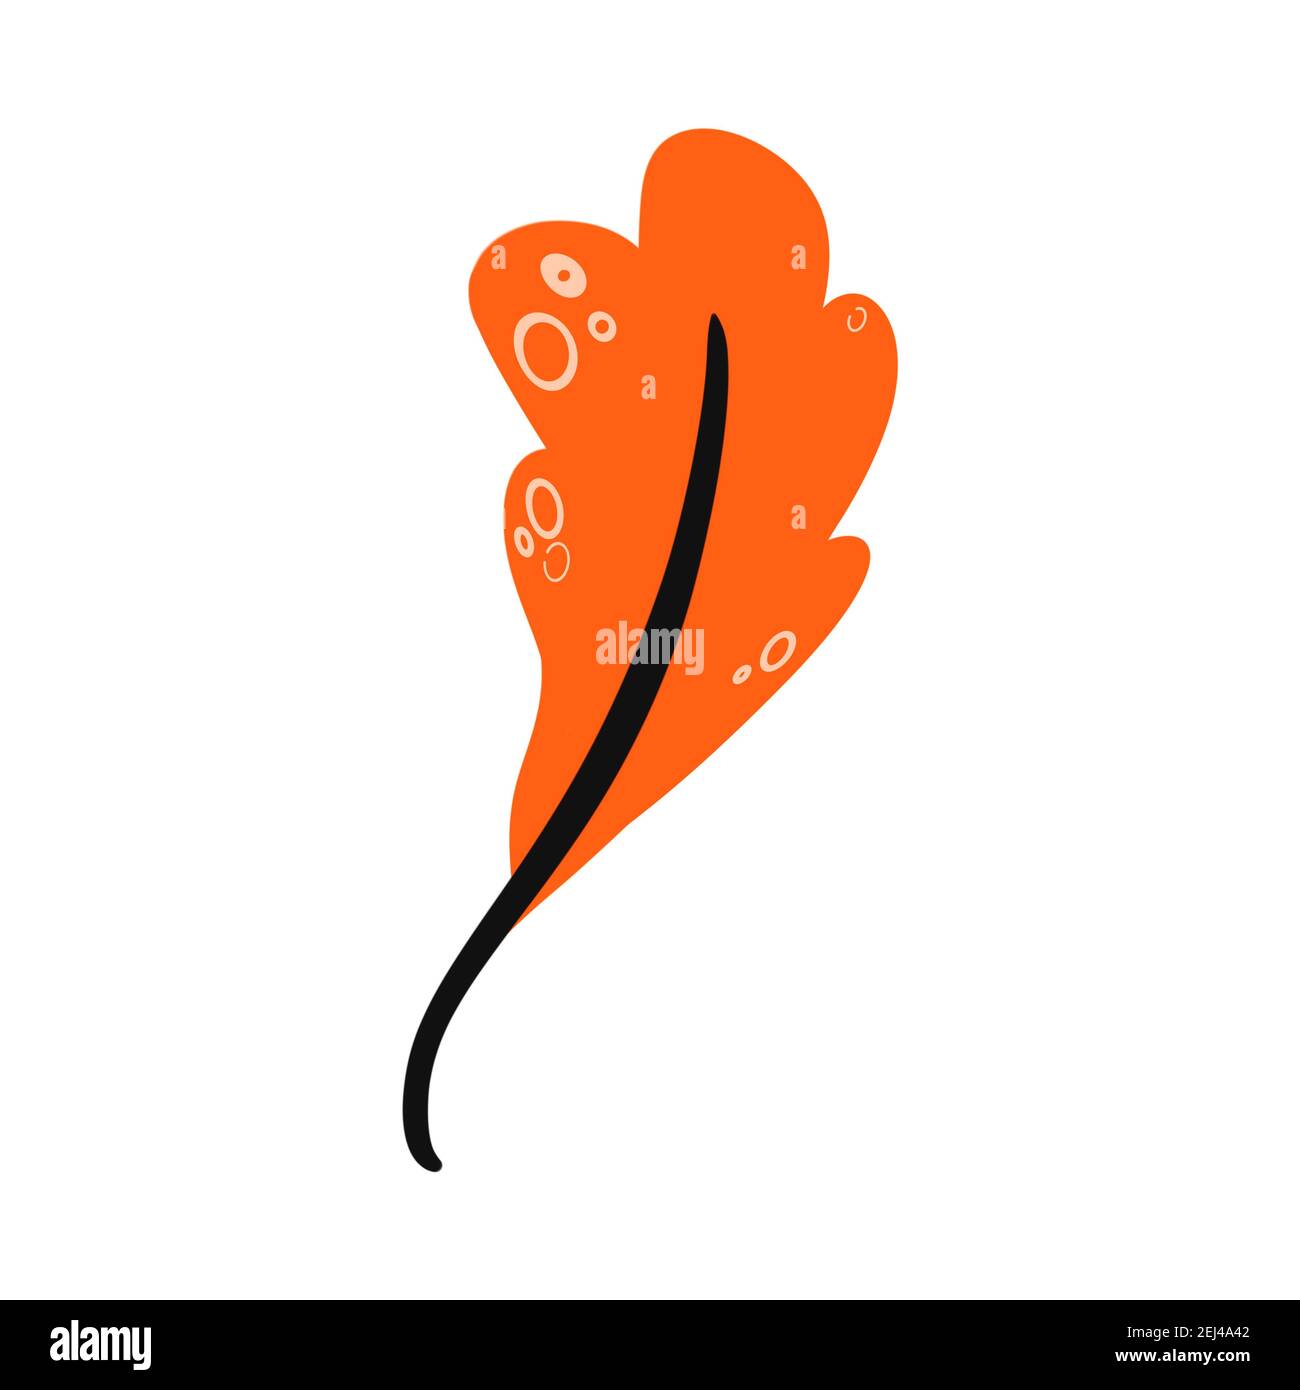 Illustration of spring colorful orange leaf, leaves icon in flat style for holiday, on white background Stock Photo